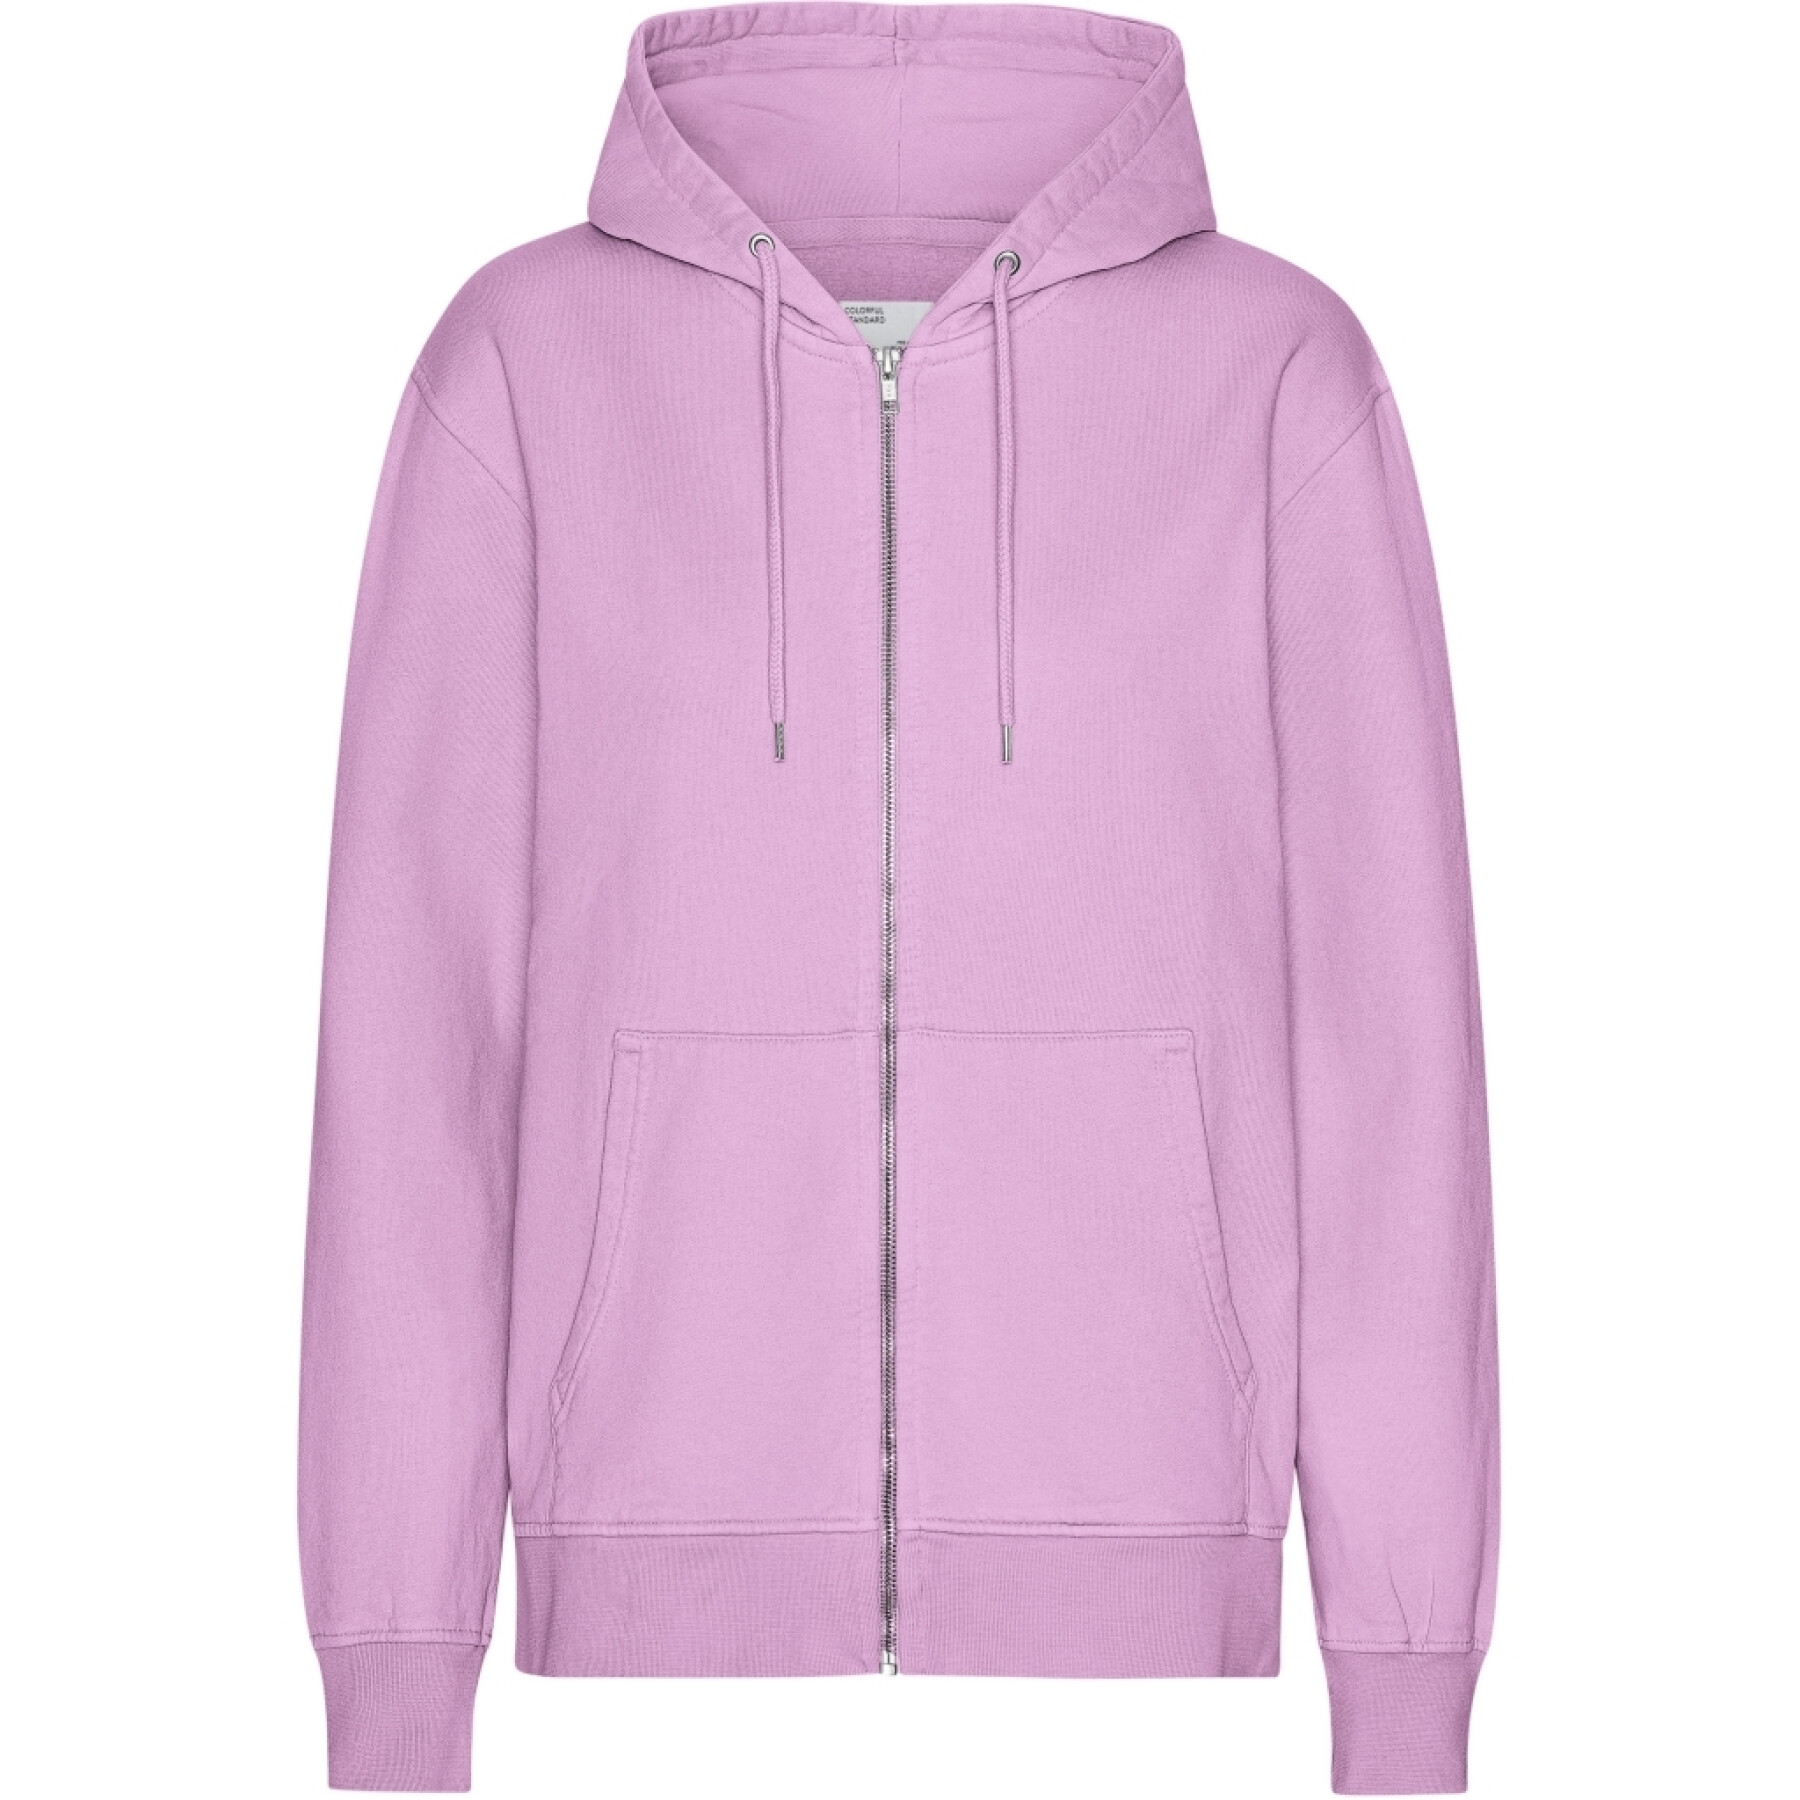 Zip-up hoodie Colorful Standard Classic Organic Cherry Blossom